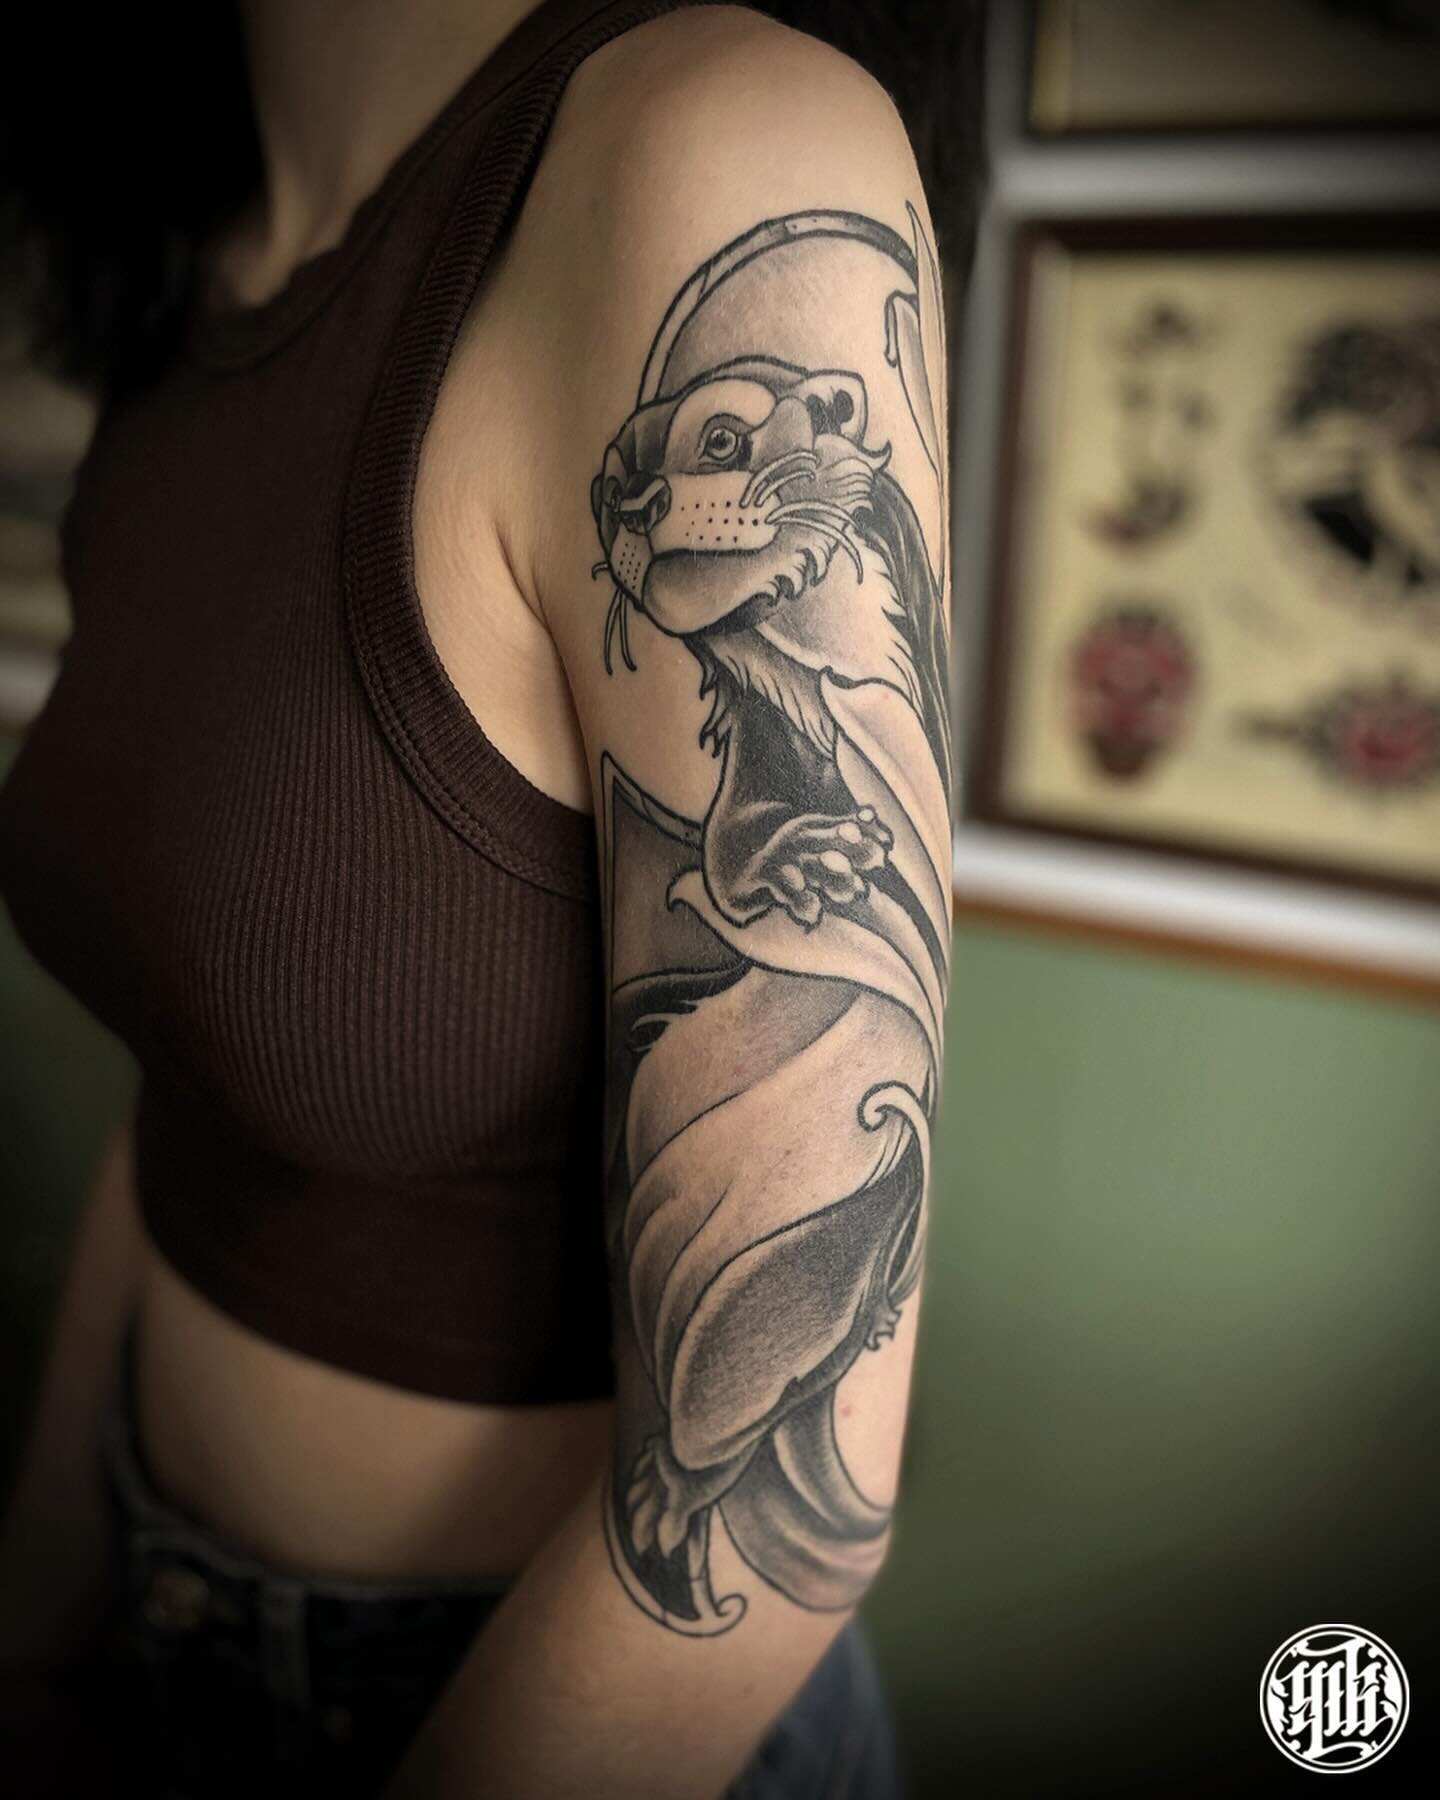 🦦Healed otter before small touch up 
 for @samanthanry 
Thanks a lot for your trust 🙏

Swipe to see the rest of the arm 

🌗 Booking open for April 🌓
Next Guest : 
&mdash;&mdash;&mdash;&mdash;&mdash;&mdash;&mdash;&mdash;&mdash;&mdash;&mdash;&mdash